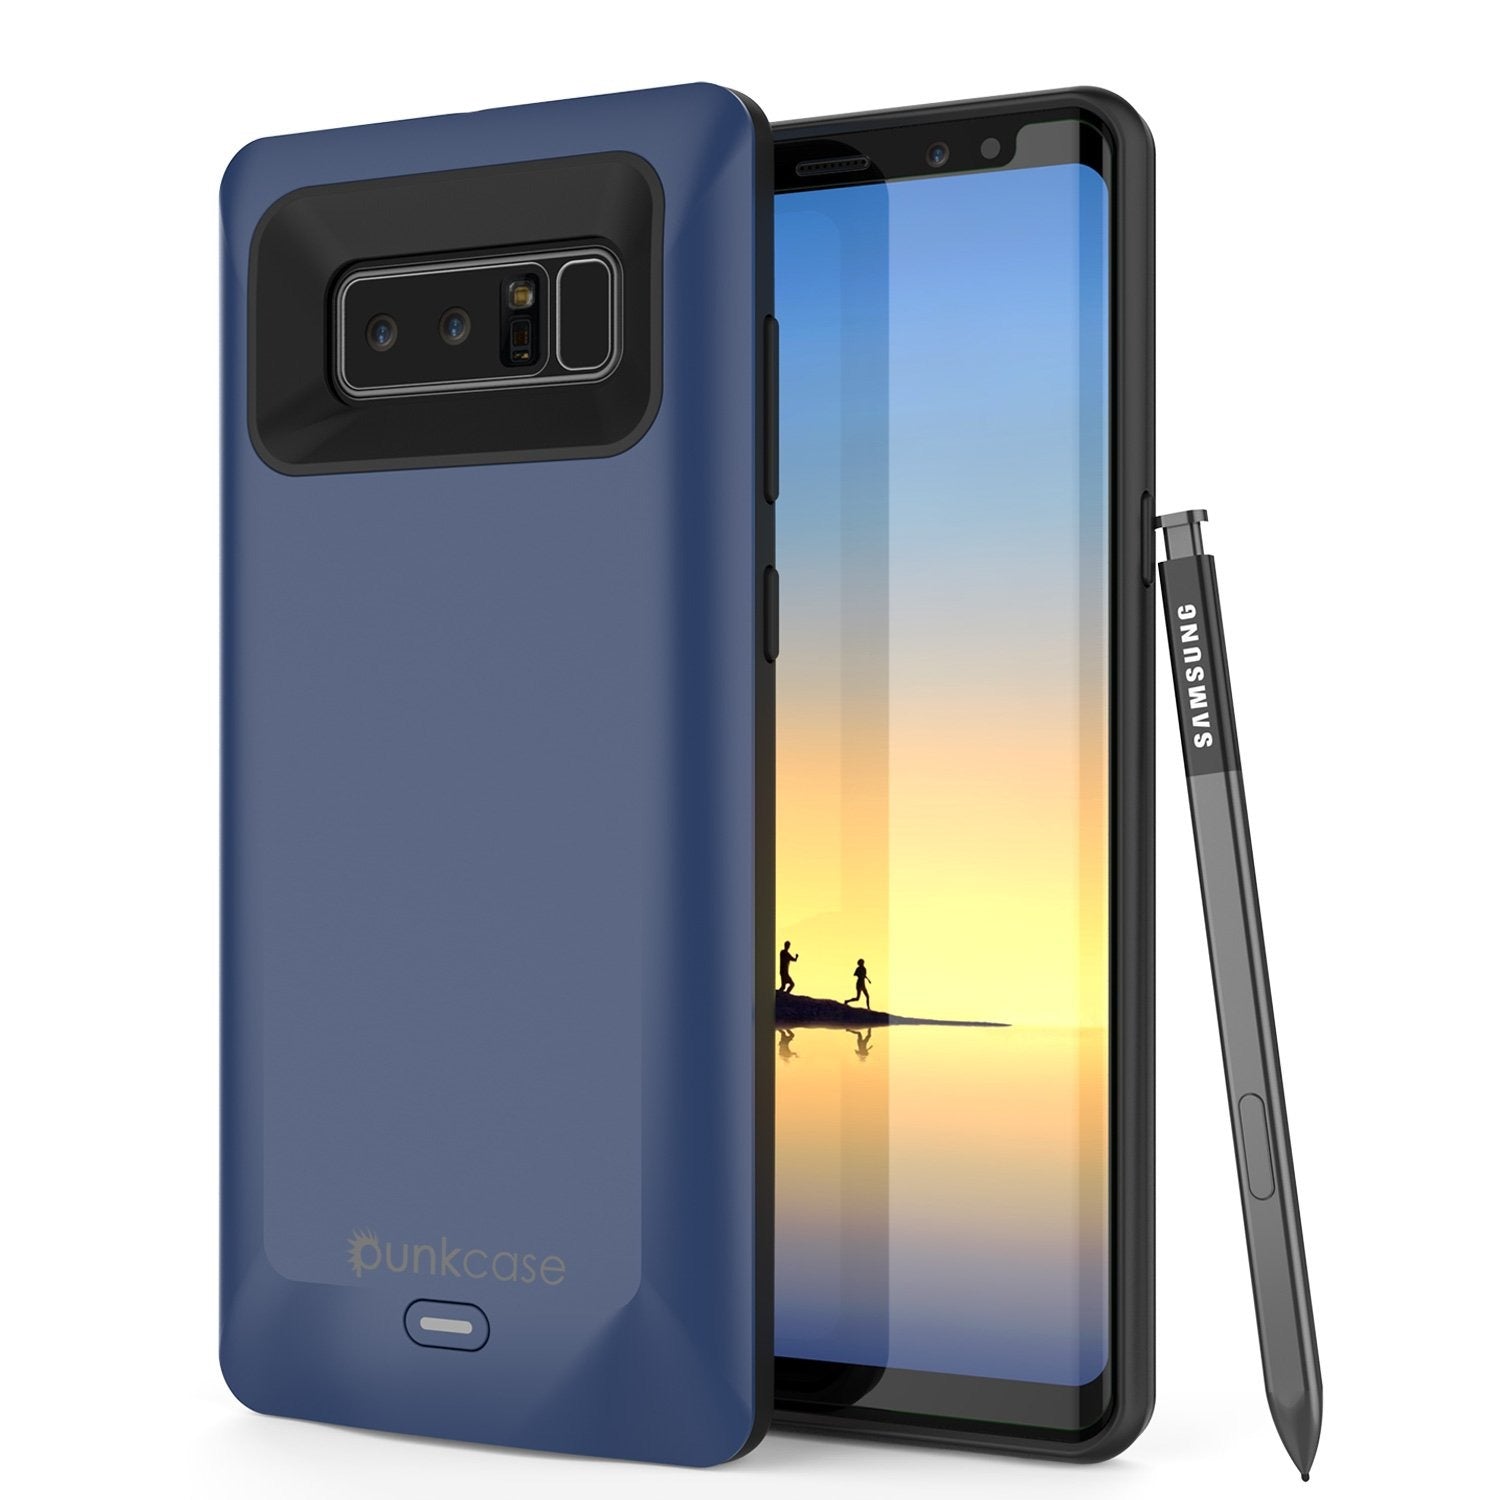 Galaxy Note 8 Battery PunkCase, 5000mAH Charger Case W/USB port, Blue